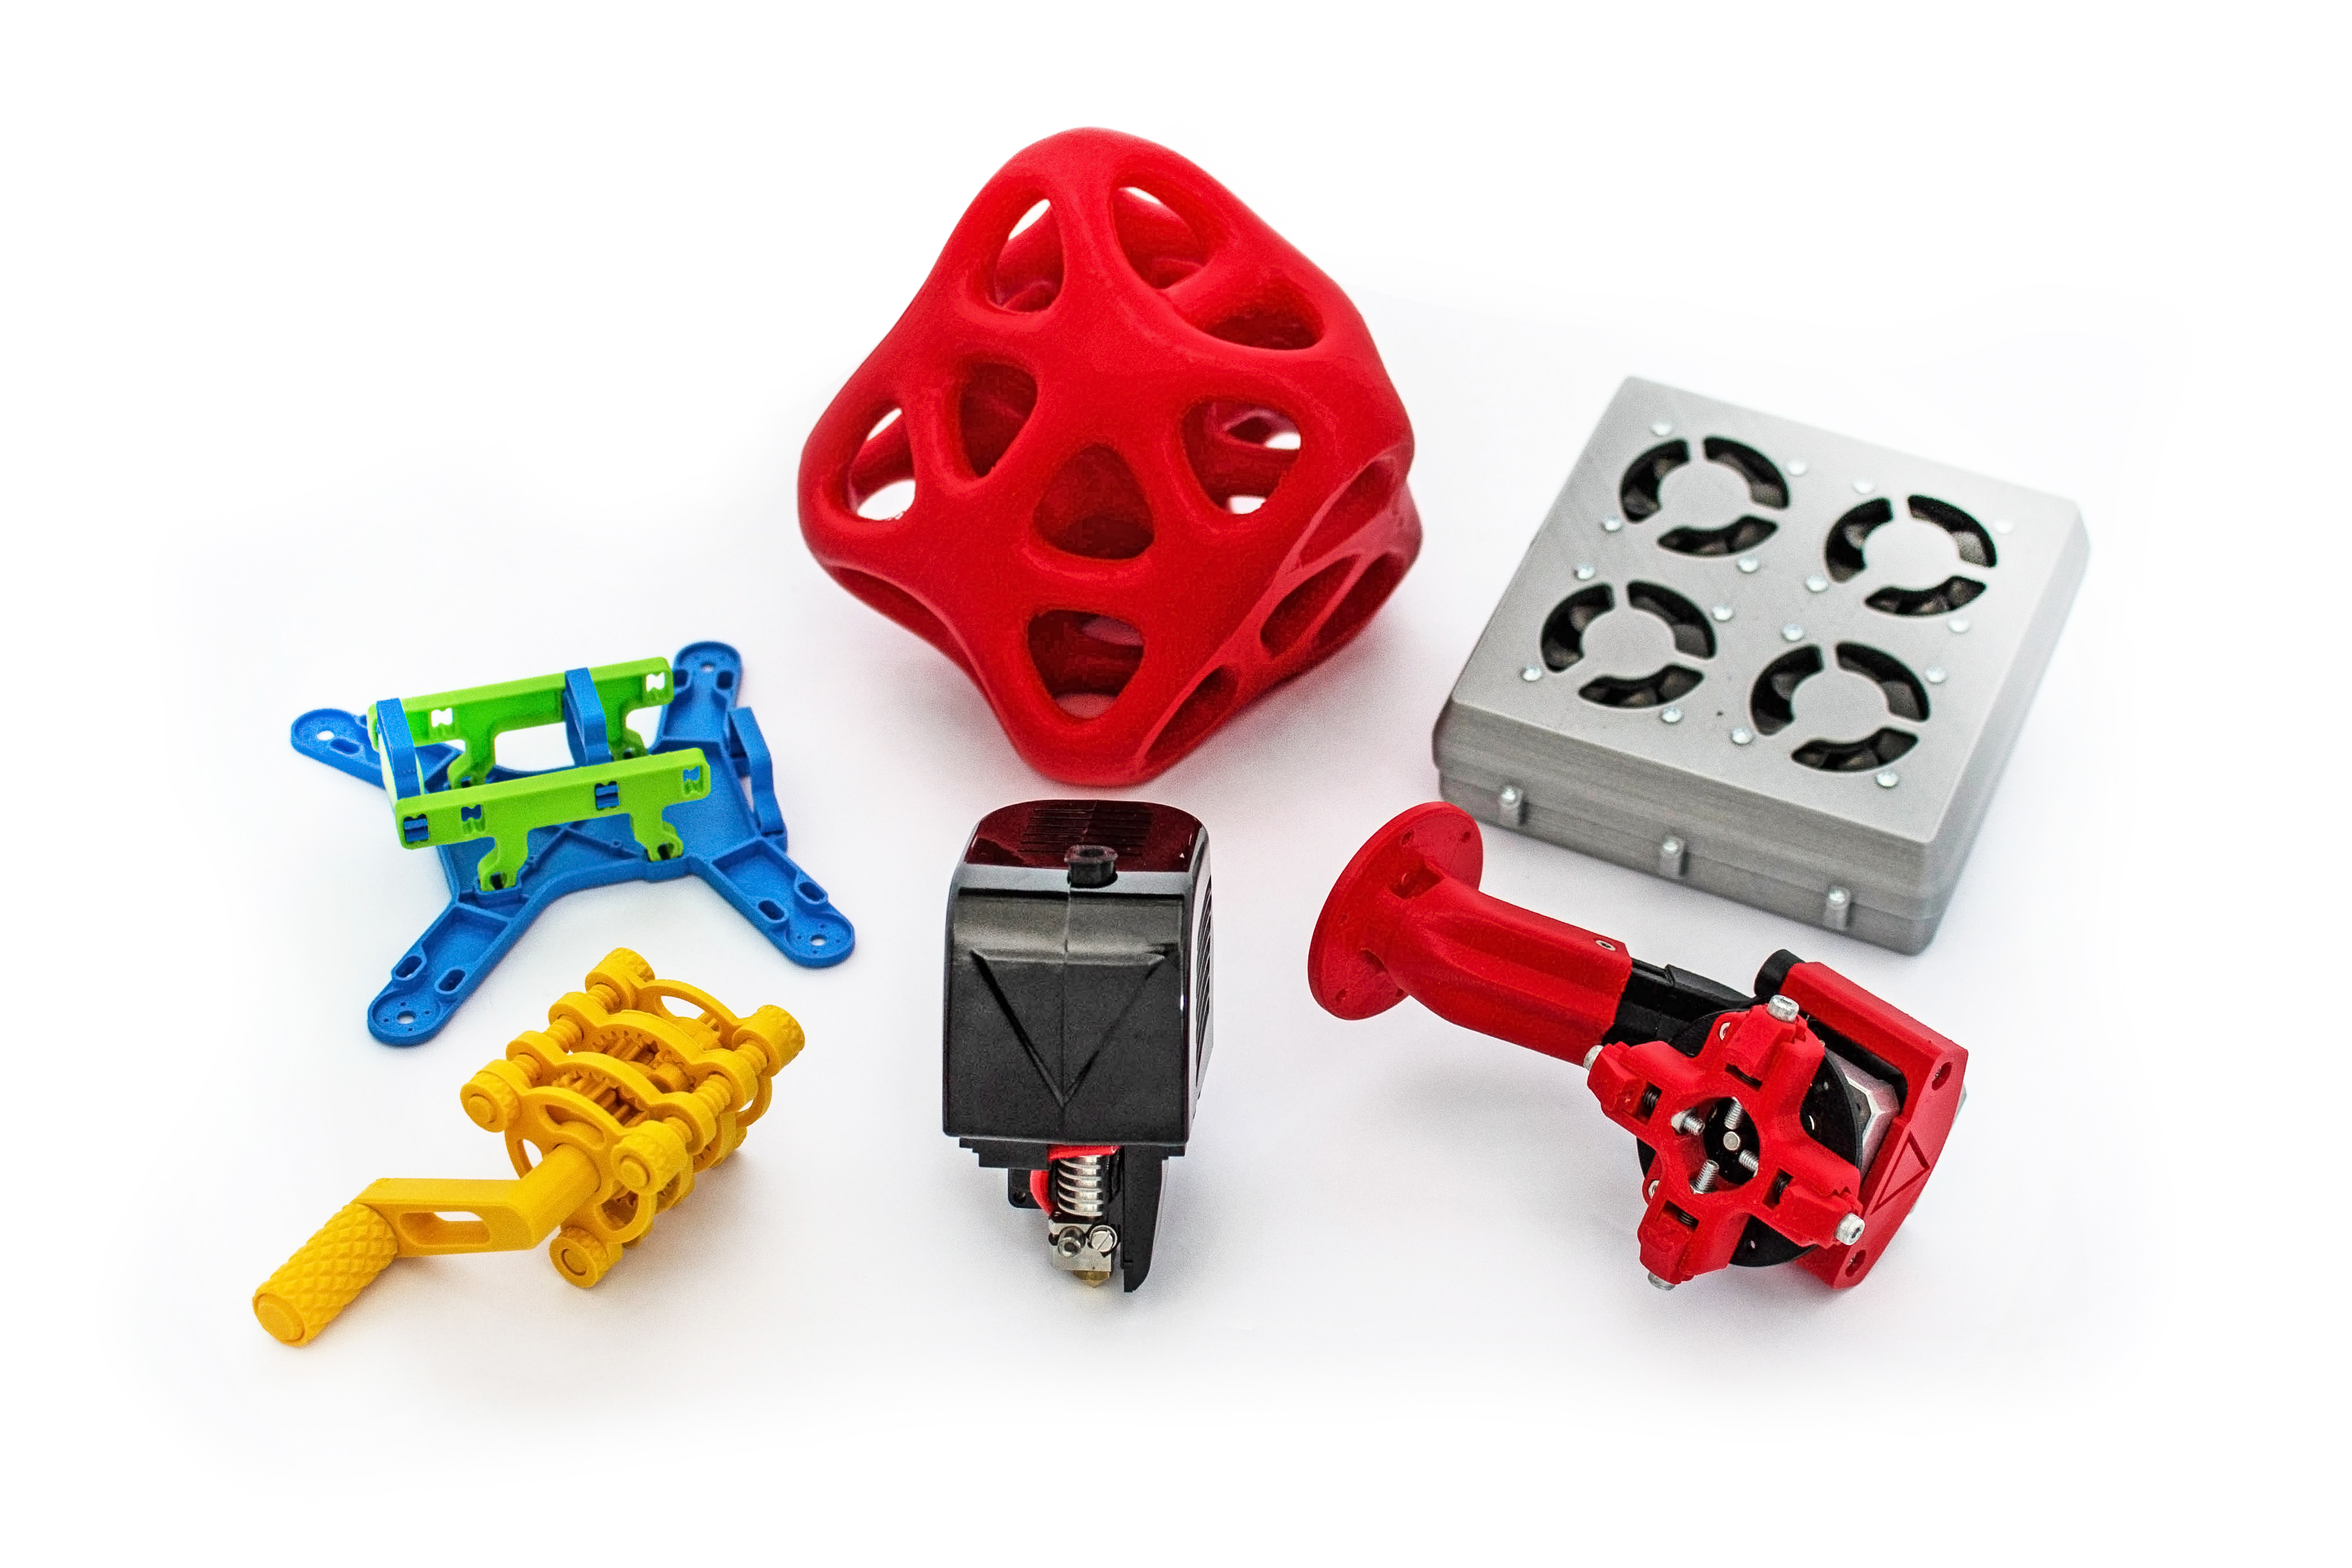 Prototyping and small production: 3D Printer, milling machine, laser engraving, 3D Scanner